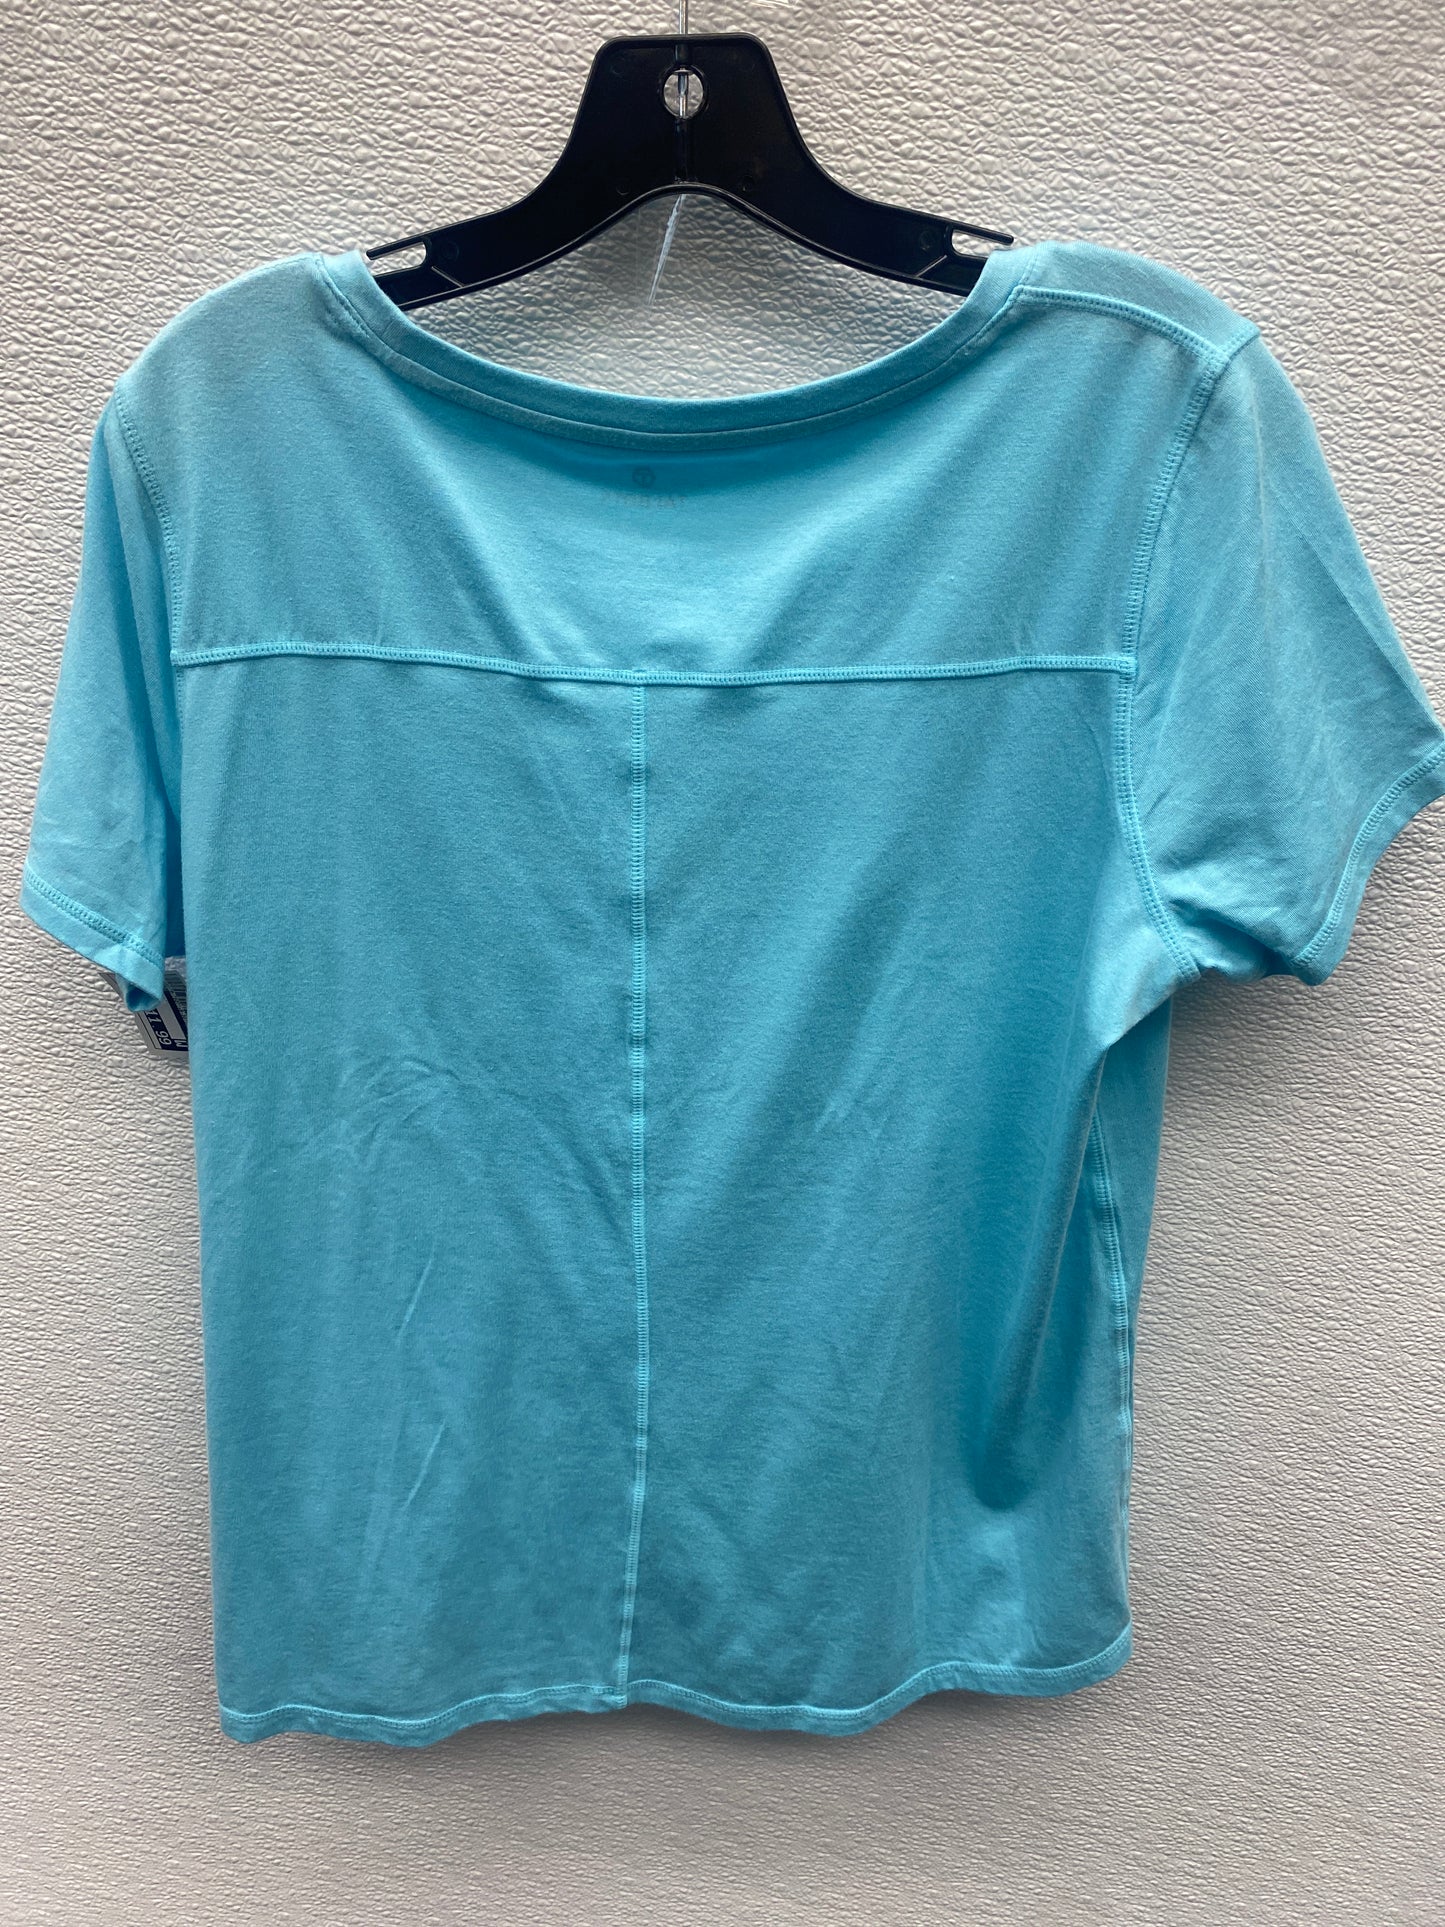 Top Short Sleeve Basic By Talbots  Size: 1x